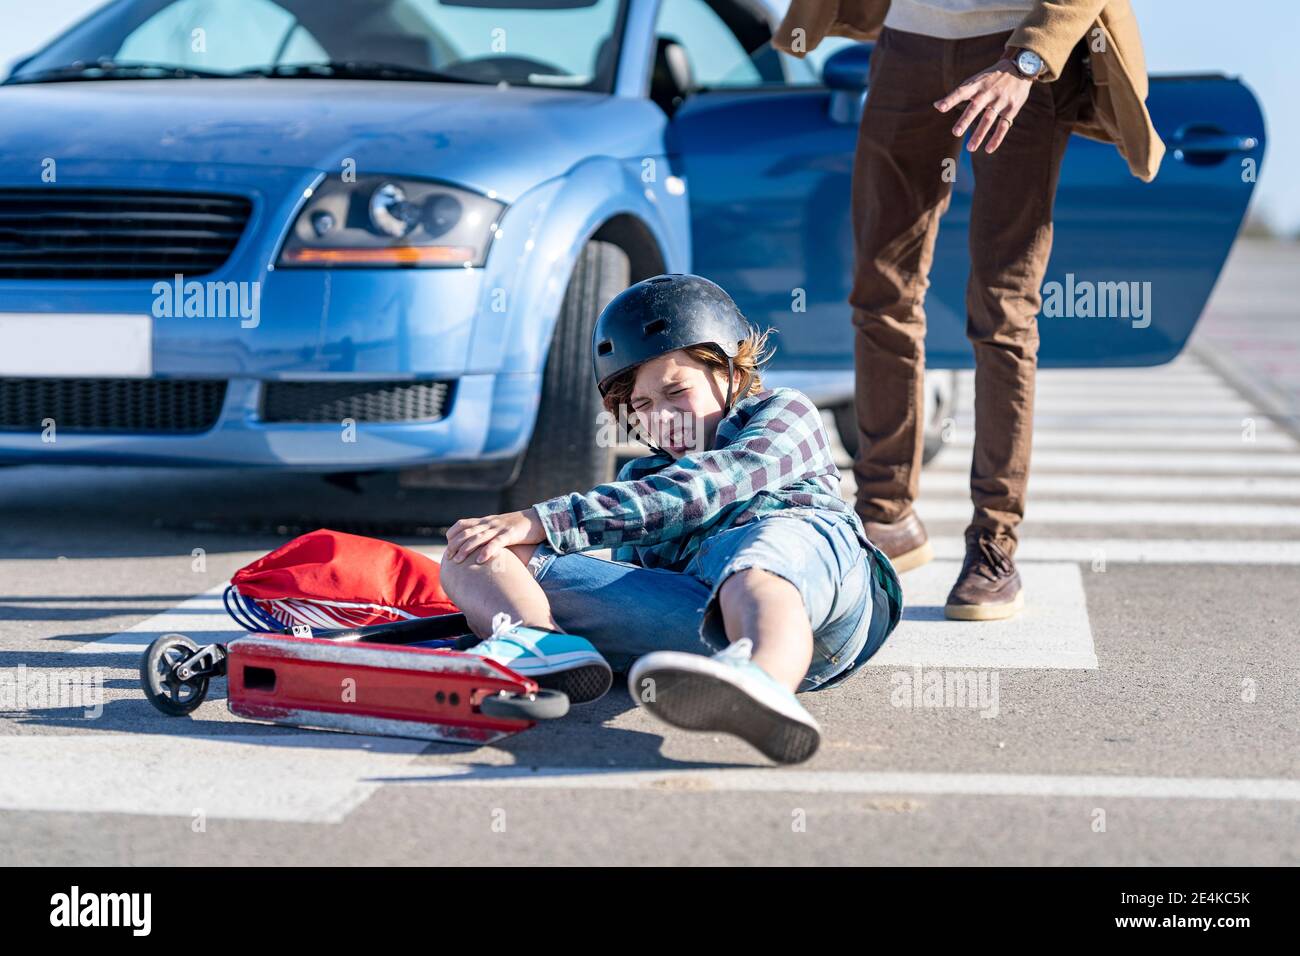 Boy falling down from push scooter with man standing by car on road after accident Stock Photo